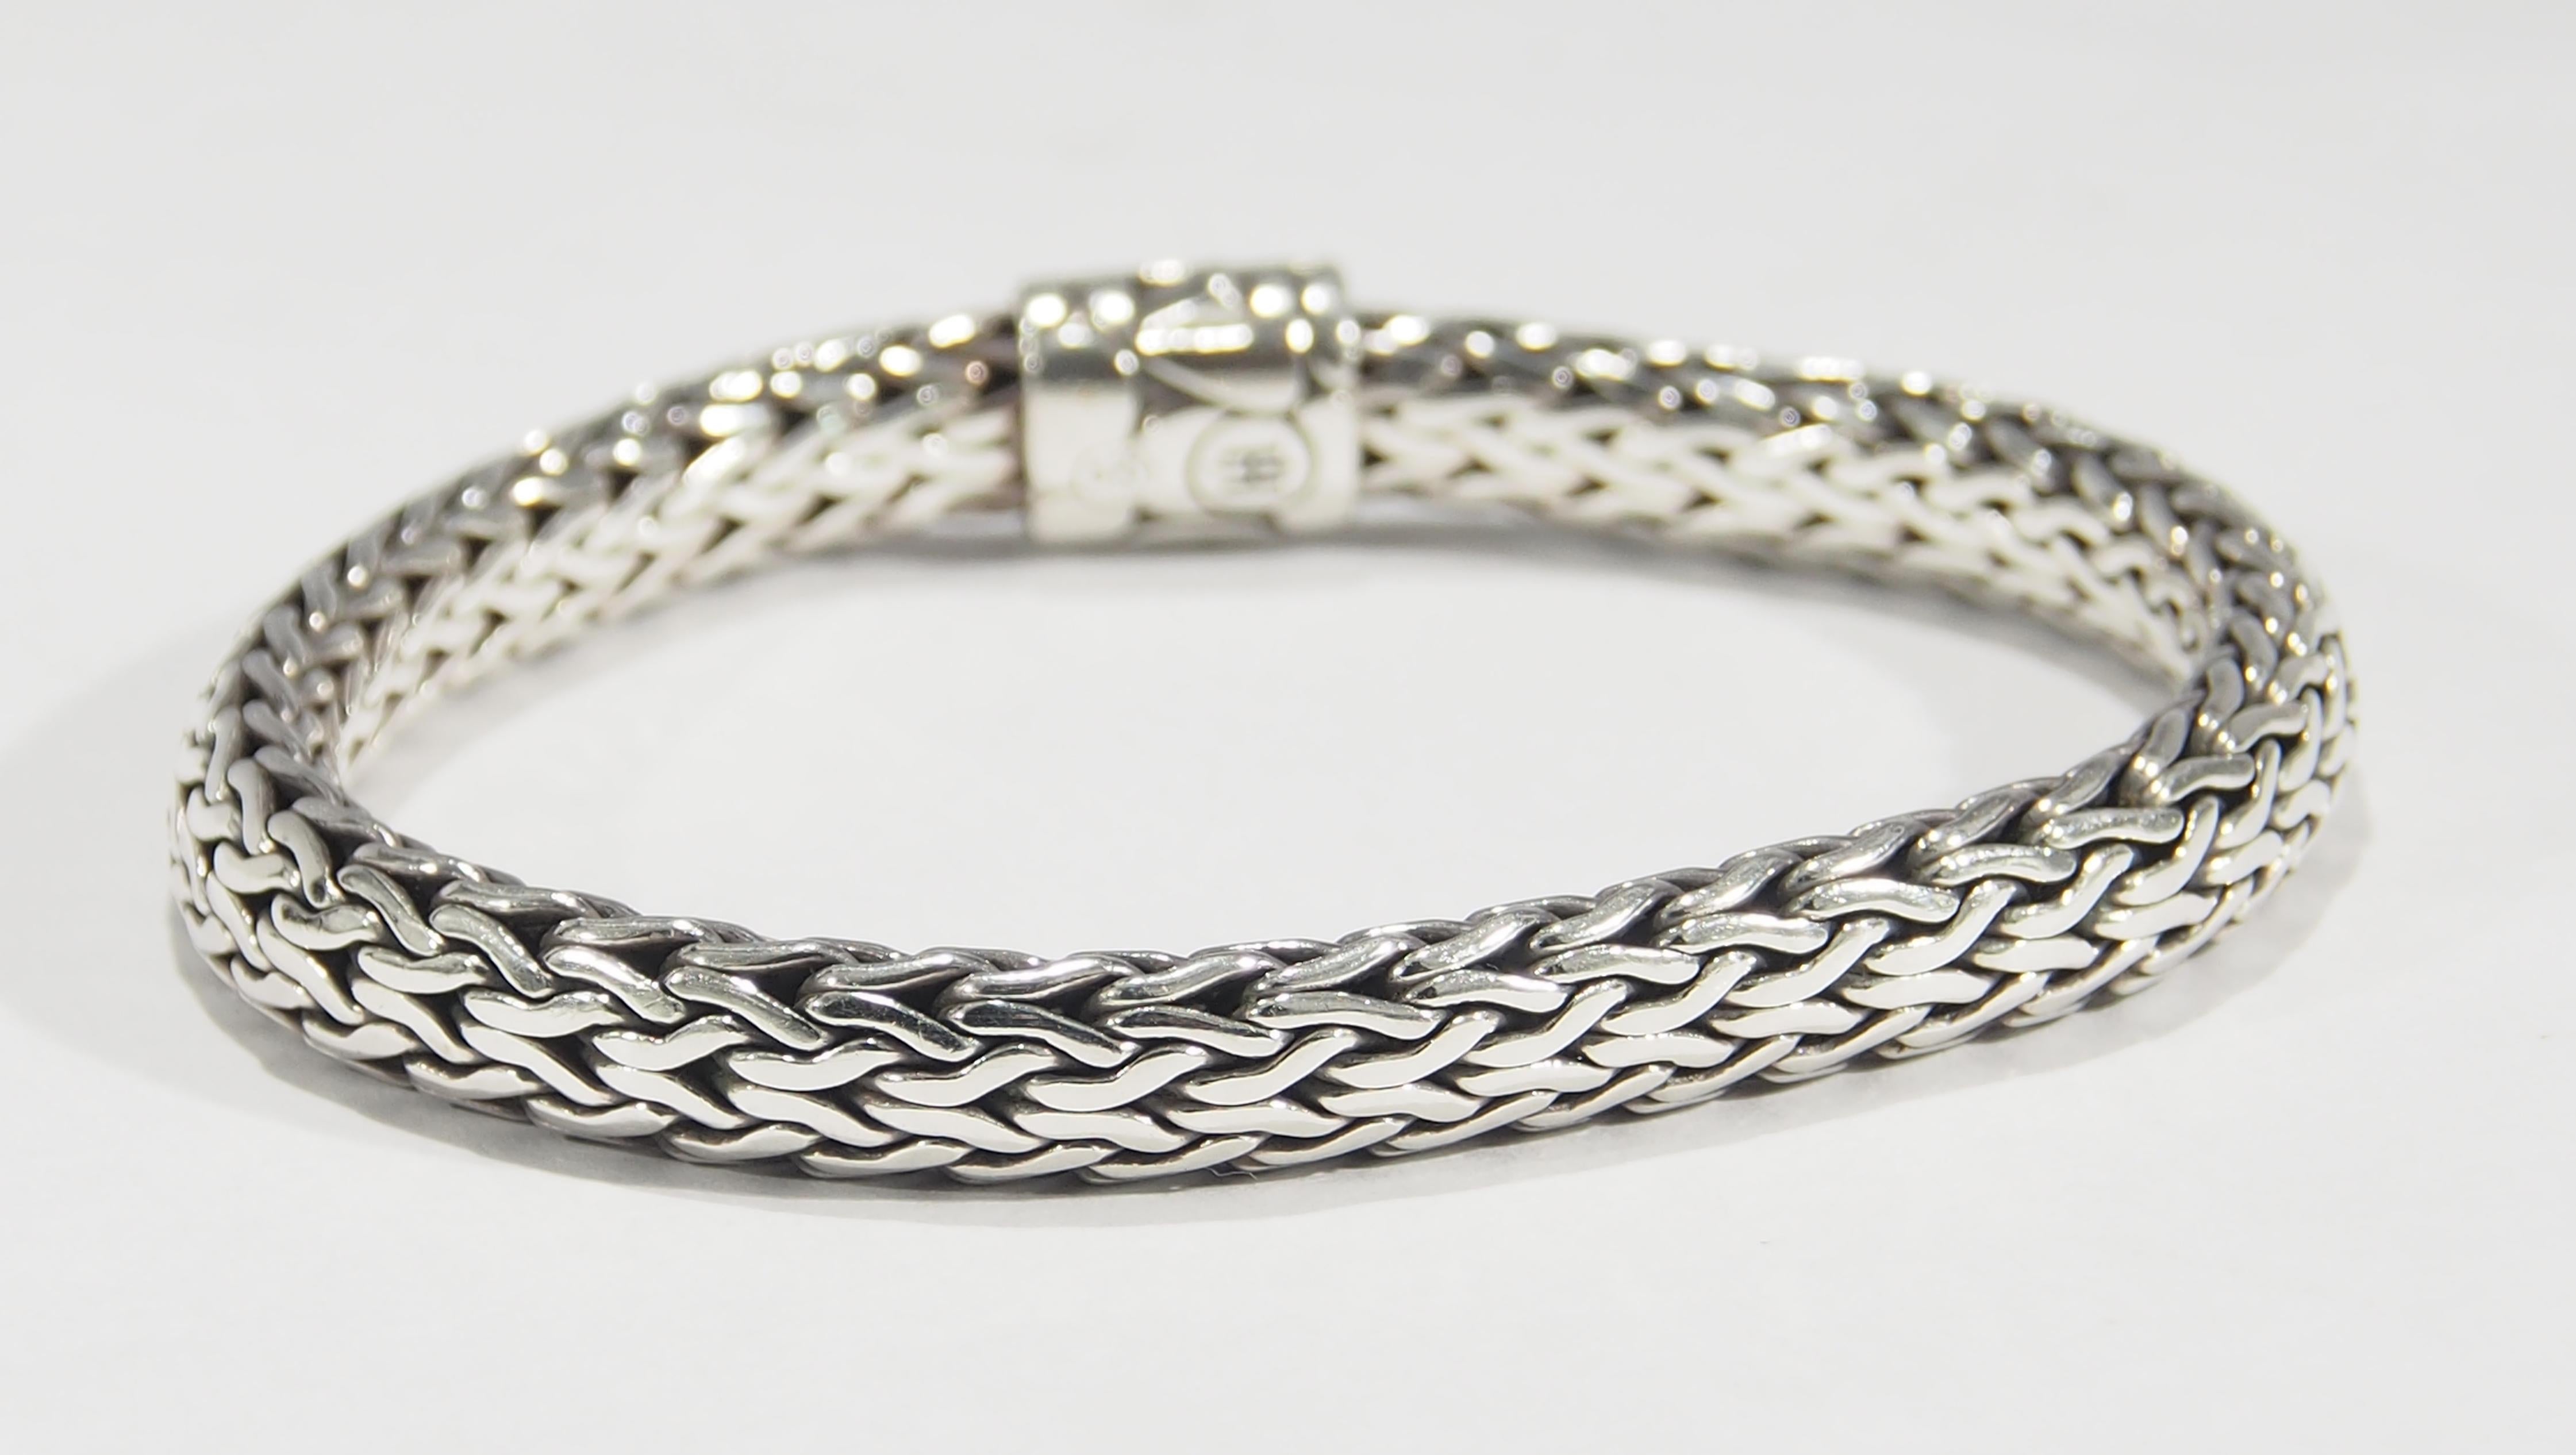 From the well known jewelry designer John Hardy, is his Sterling Silver Classic Chain Bracelet. Easily worn everyday, the bracelet is 6.5mm in width, 7 1/2 inches in length and has the signature Push Clasp. The Bracelet has the 